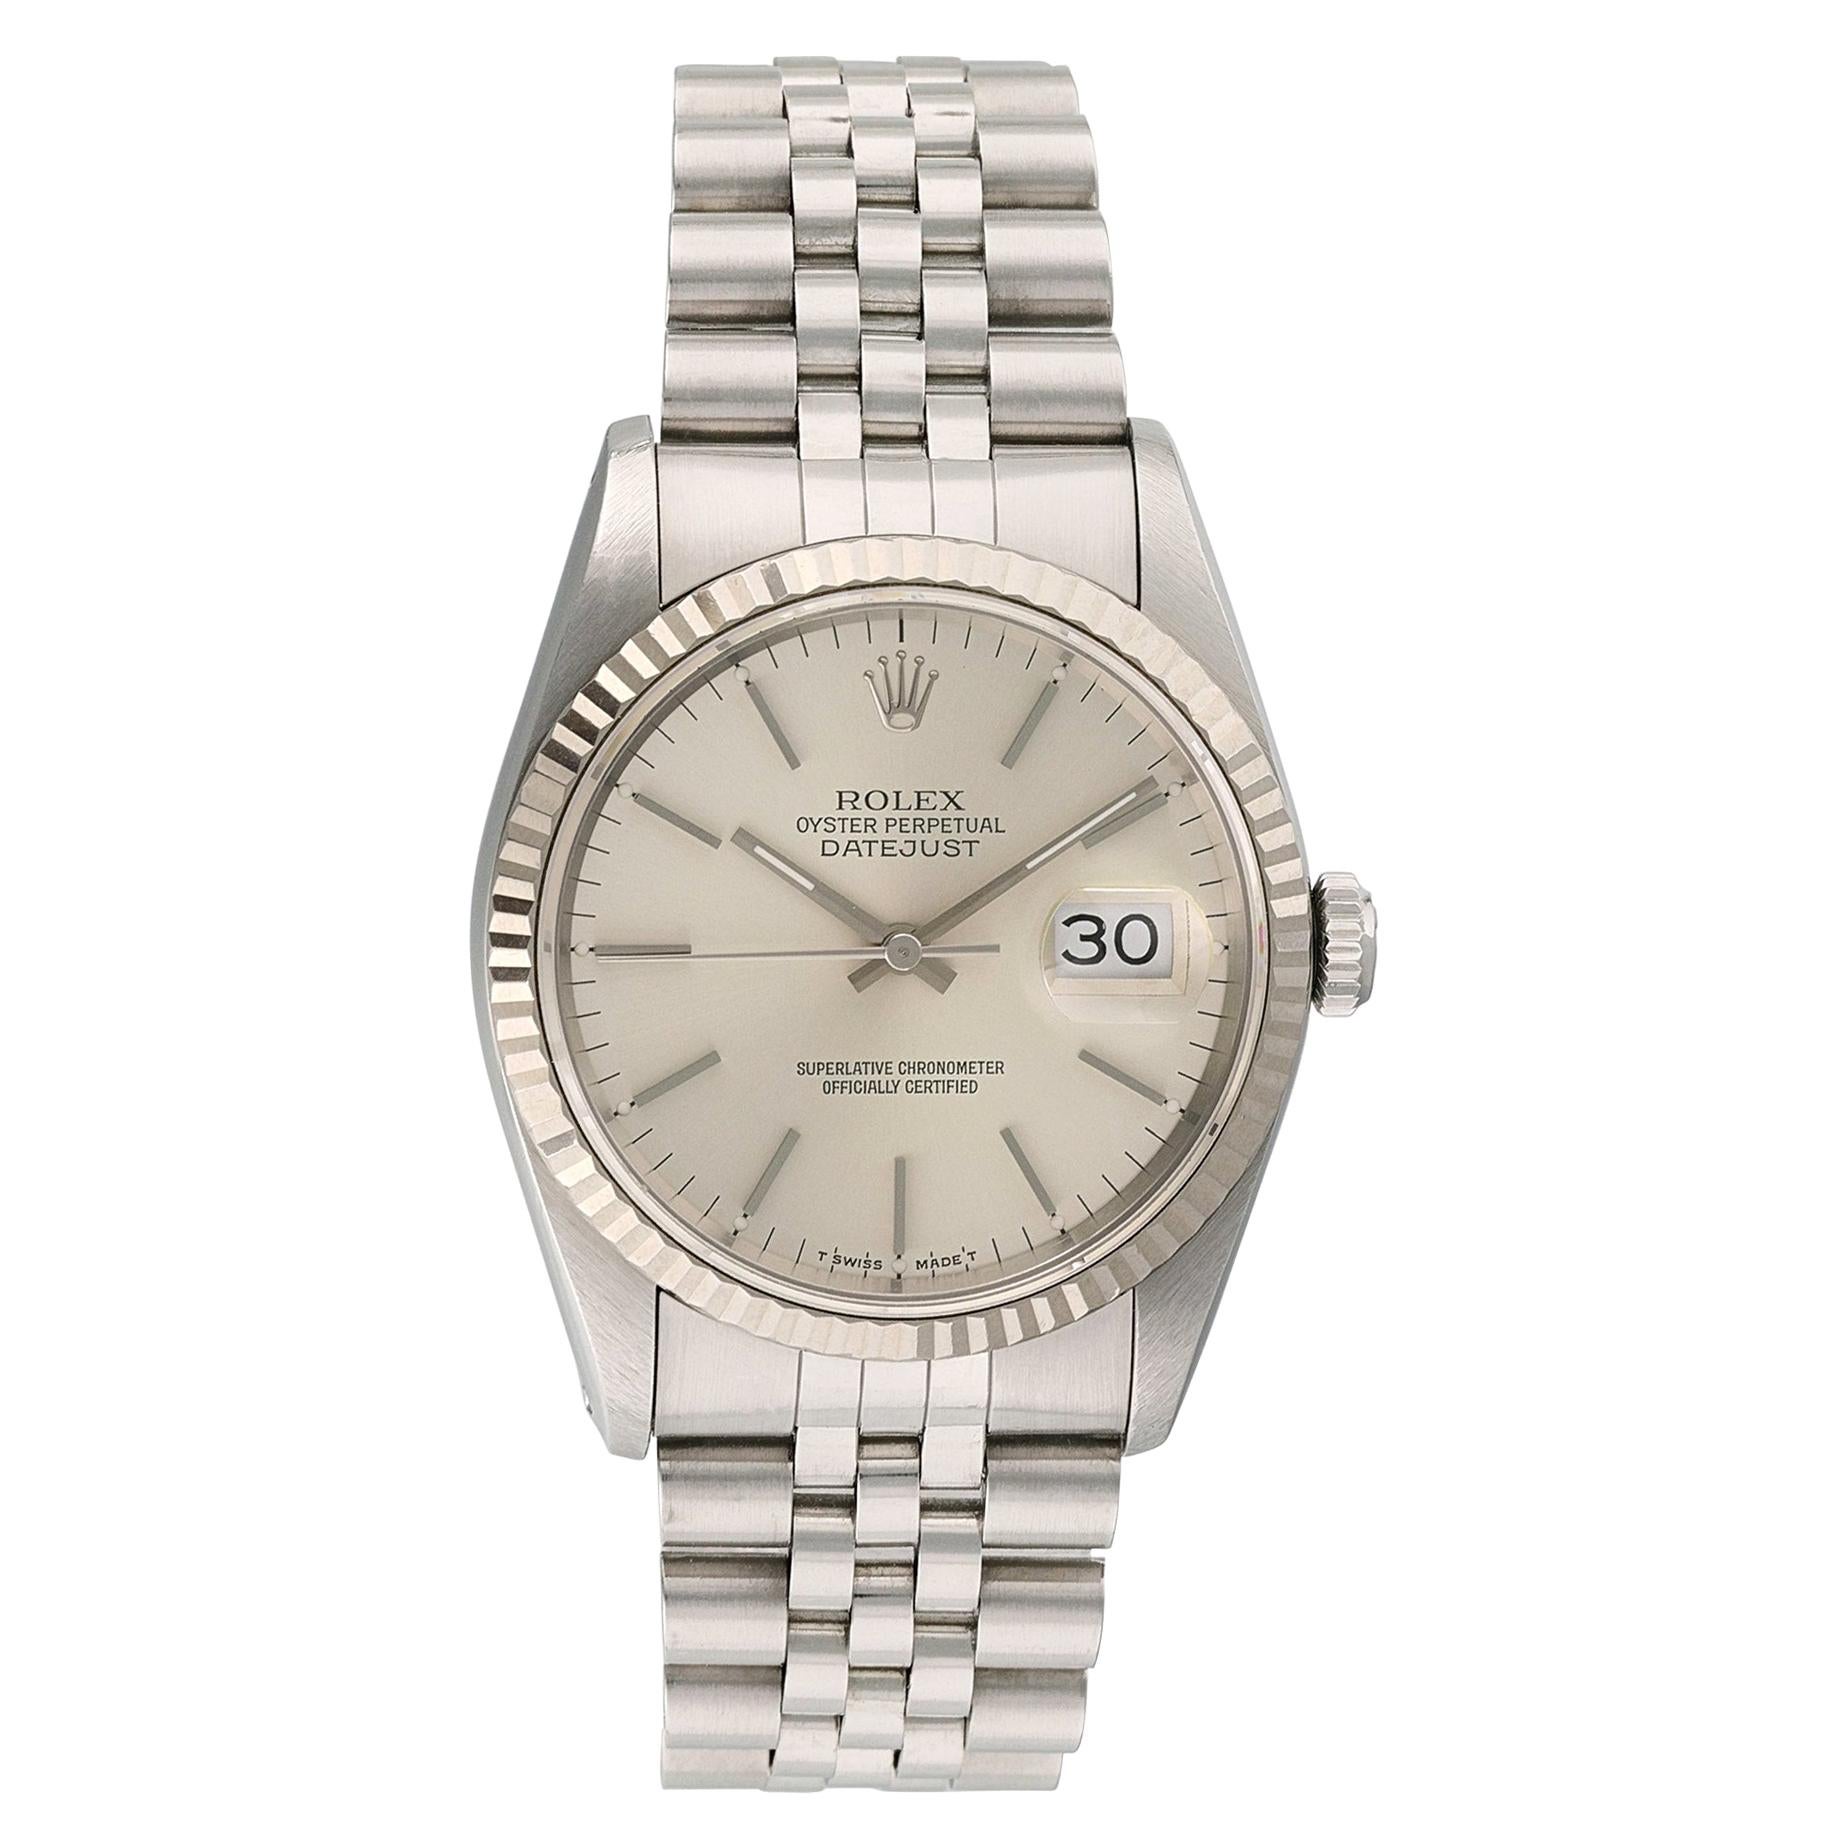 Rolex Oyster Perpetual Datejust 16234 Men’s Watch For Sale